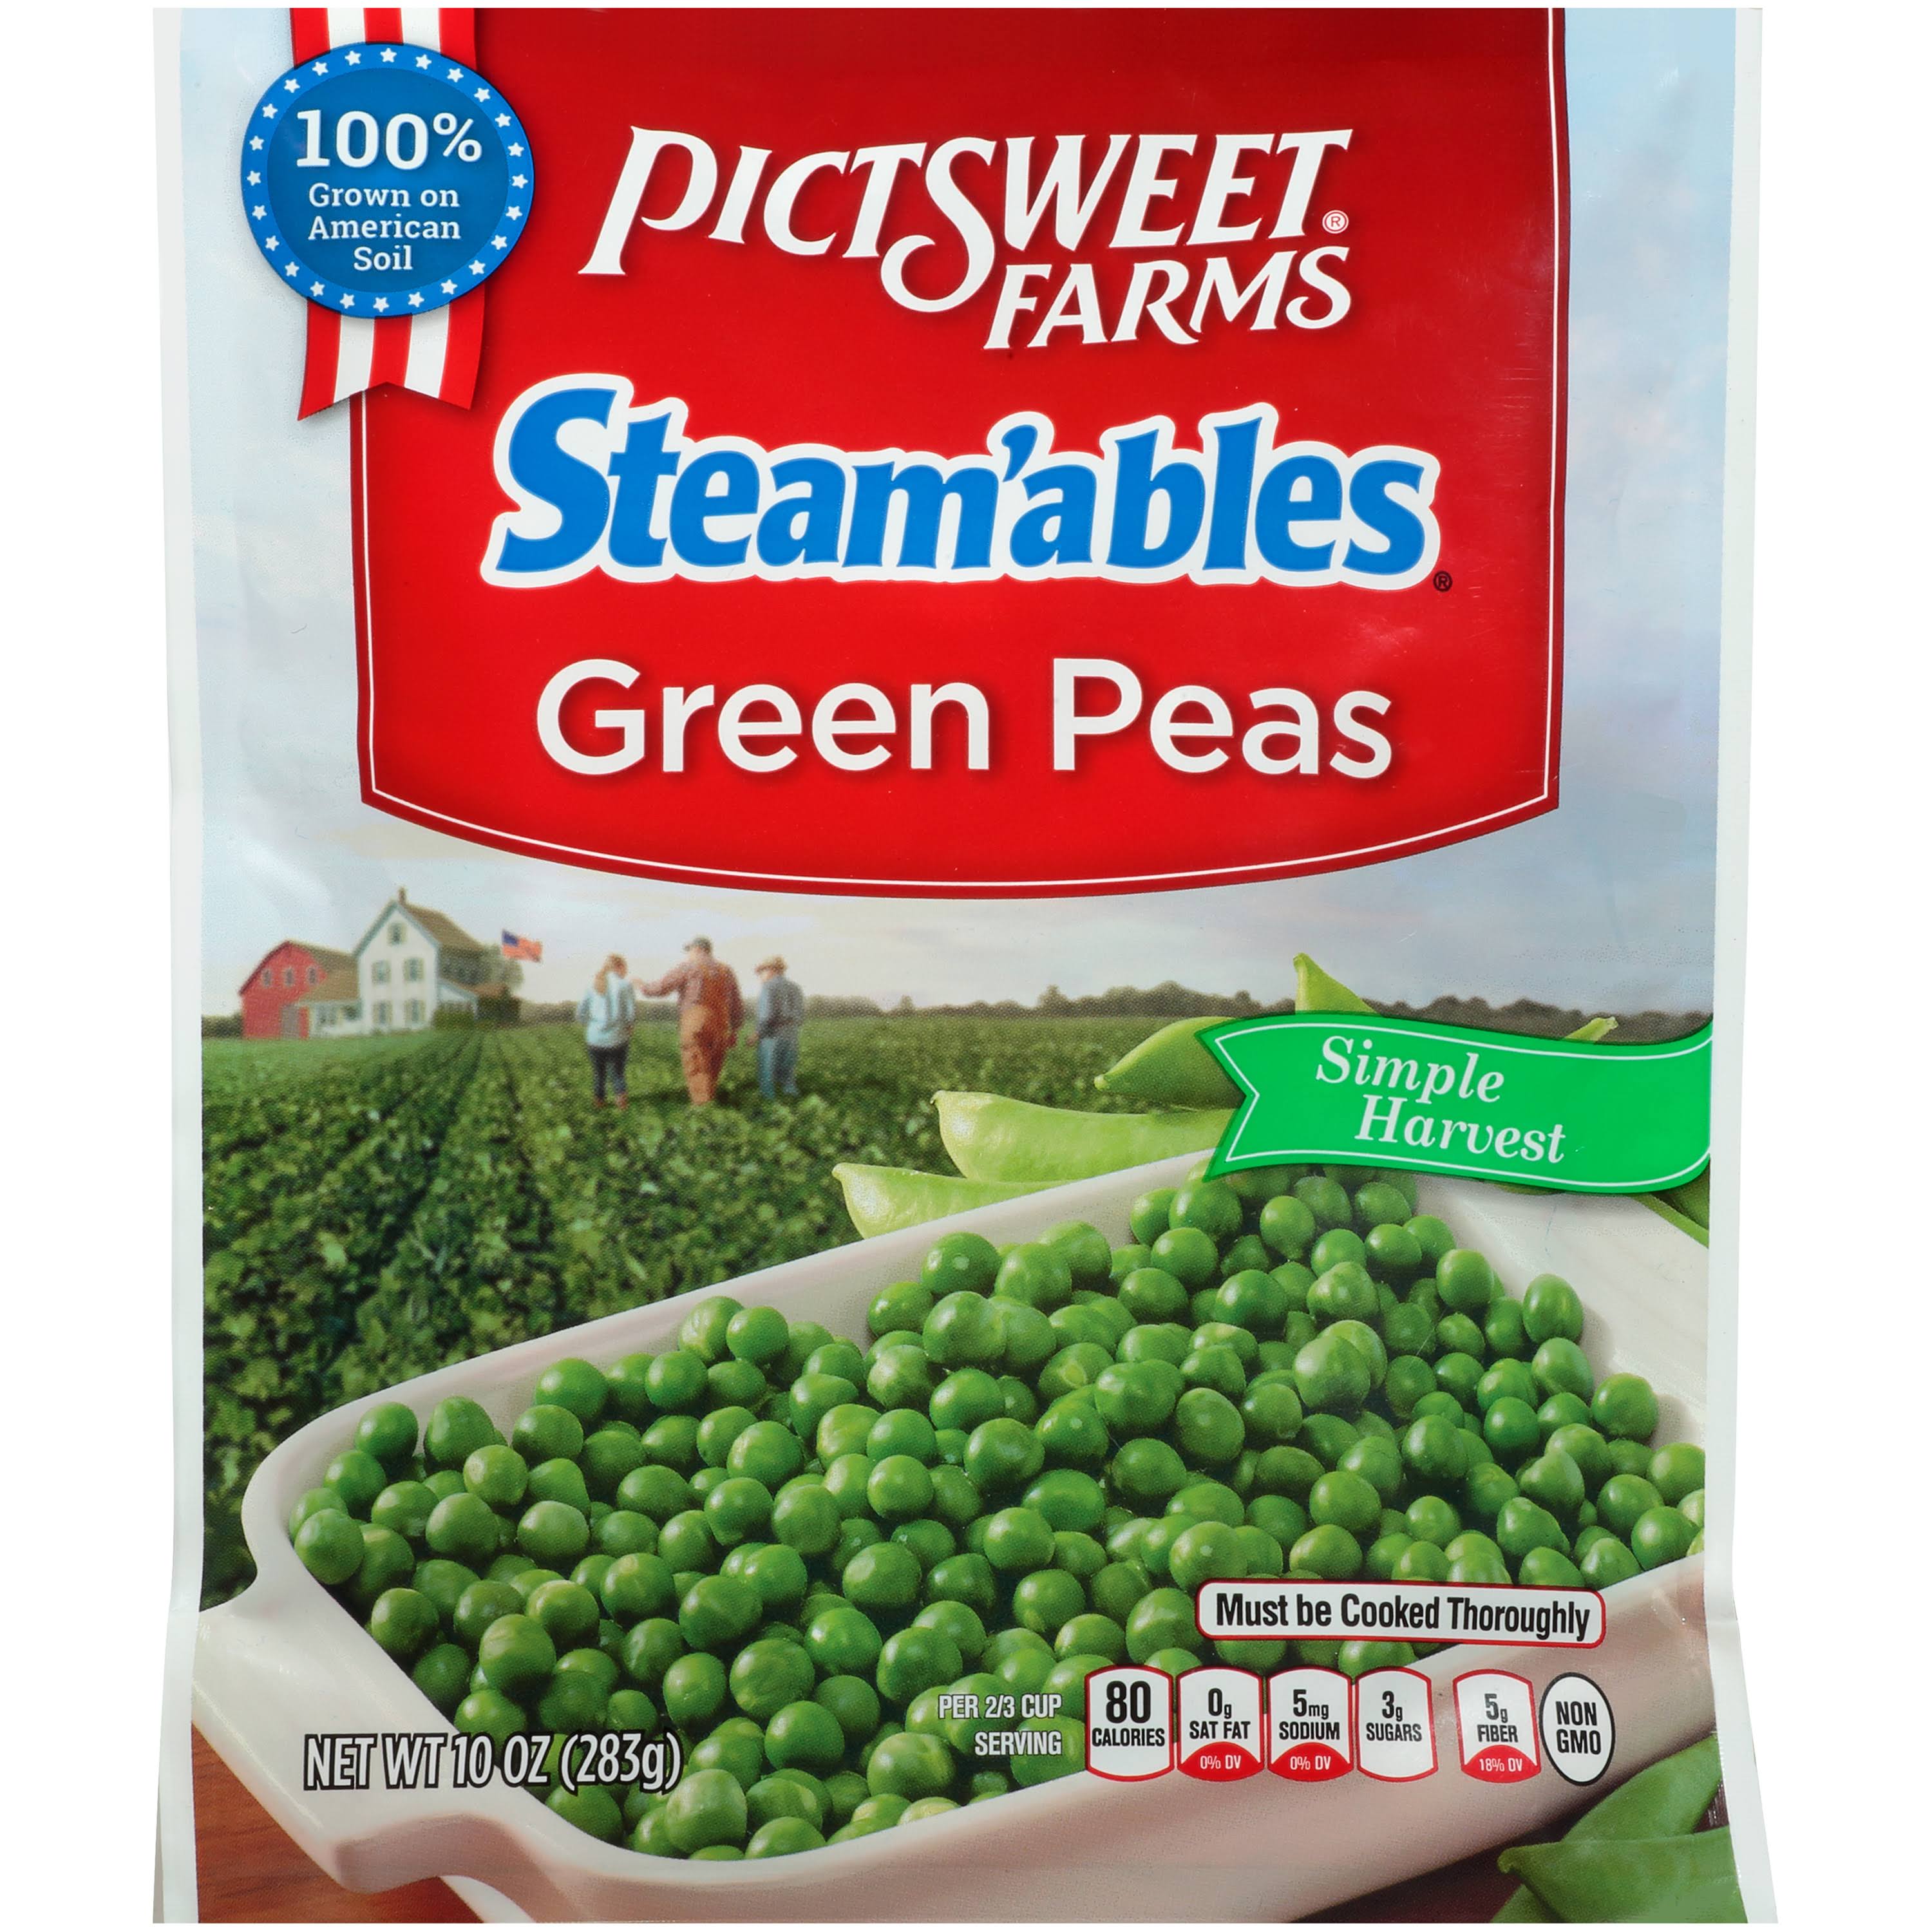 Pictsweet Farms Steam'ables Green Peas - 10 oz